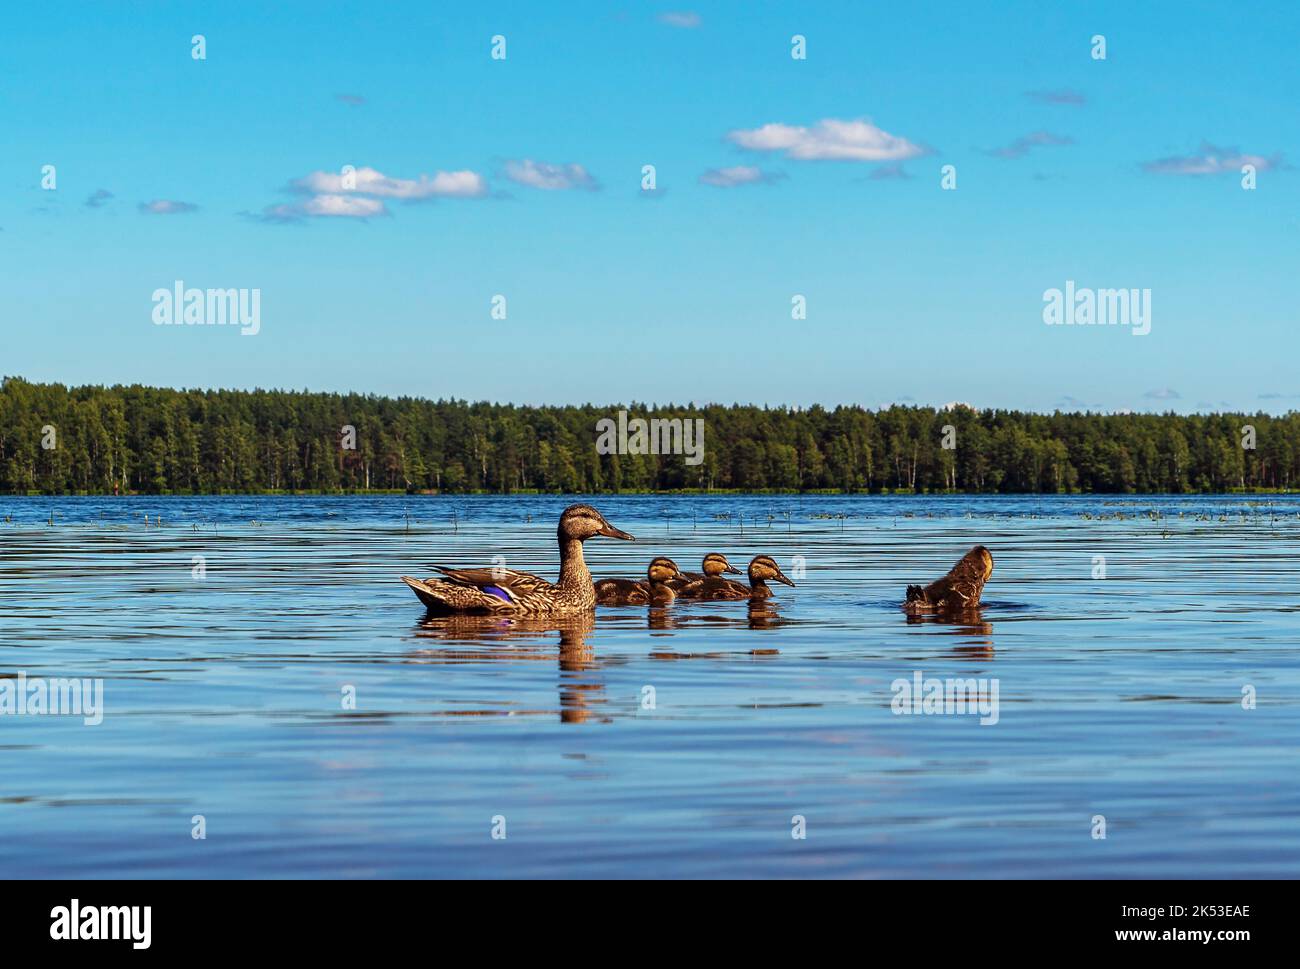 A wild duck swims with ducklings on a clear lake Stock Photo